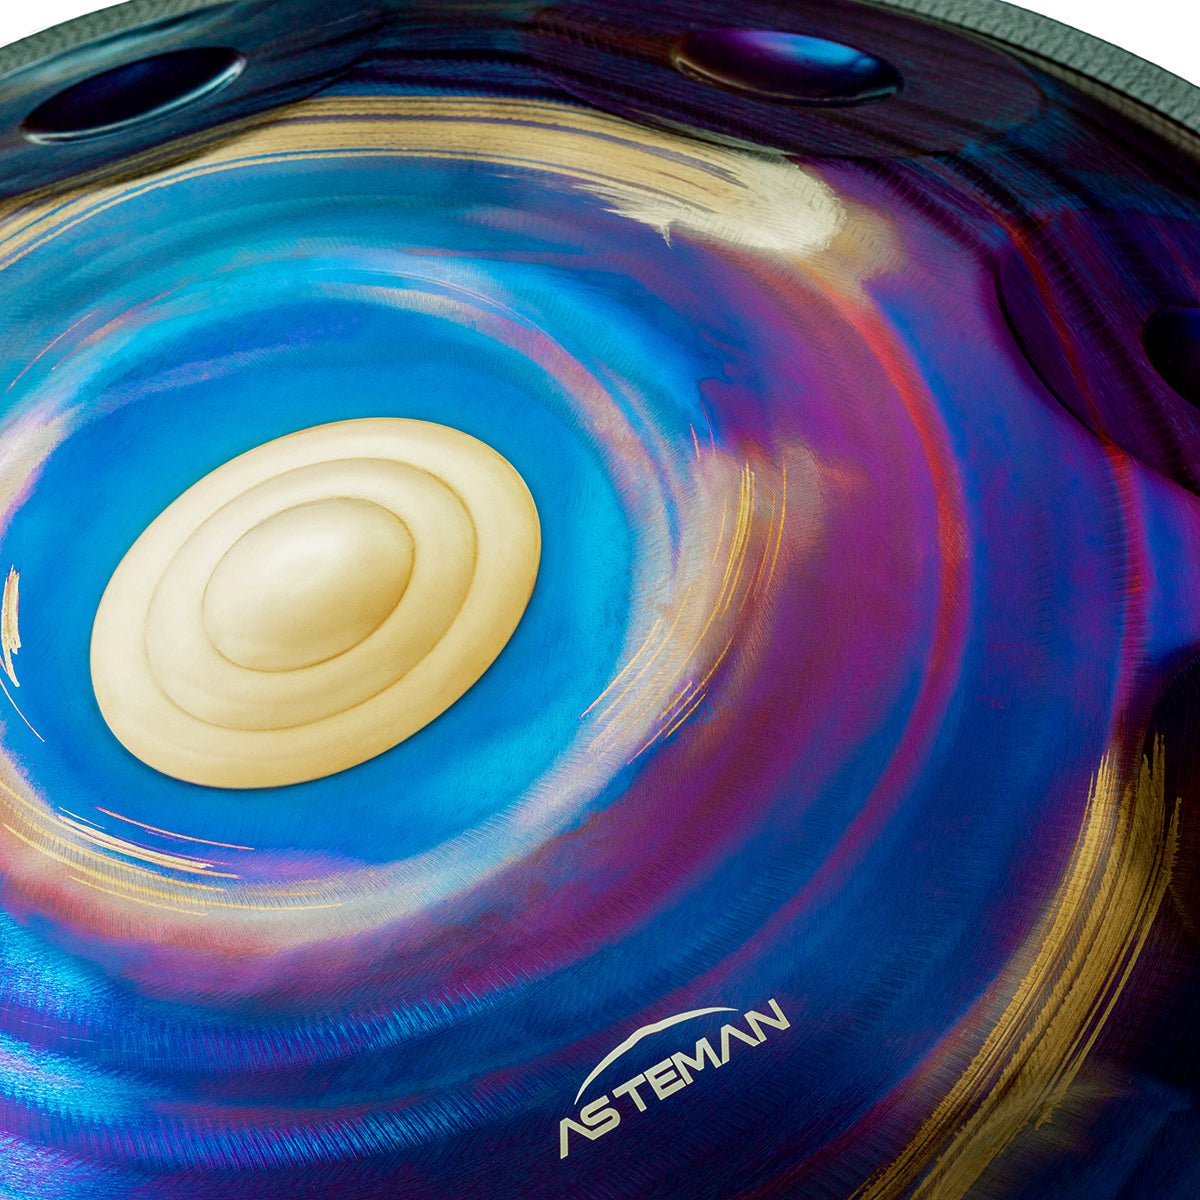 <font color="#B0171F">New </font> AS TEMAN Handpan Meteor 10 Notes D Minor Scale Blue Purple hangdrum with gift set - AS TEMAN